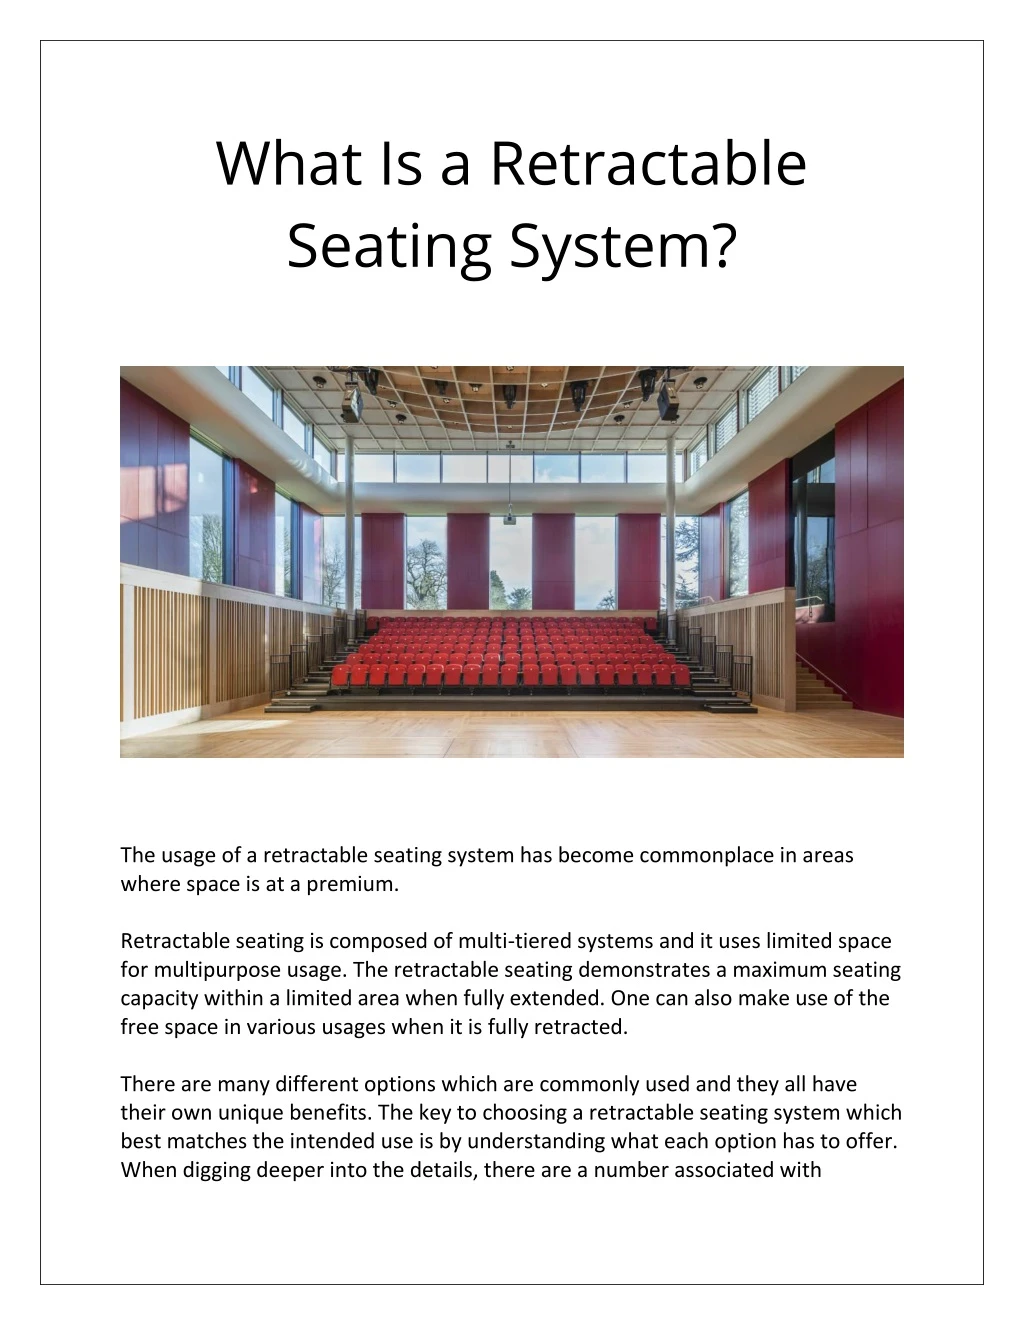 what is a retractable seating system